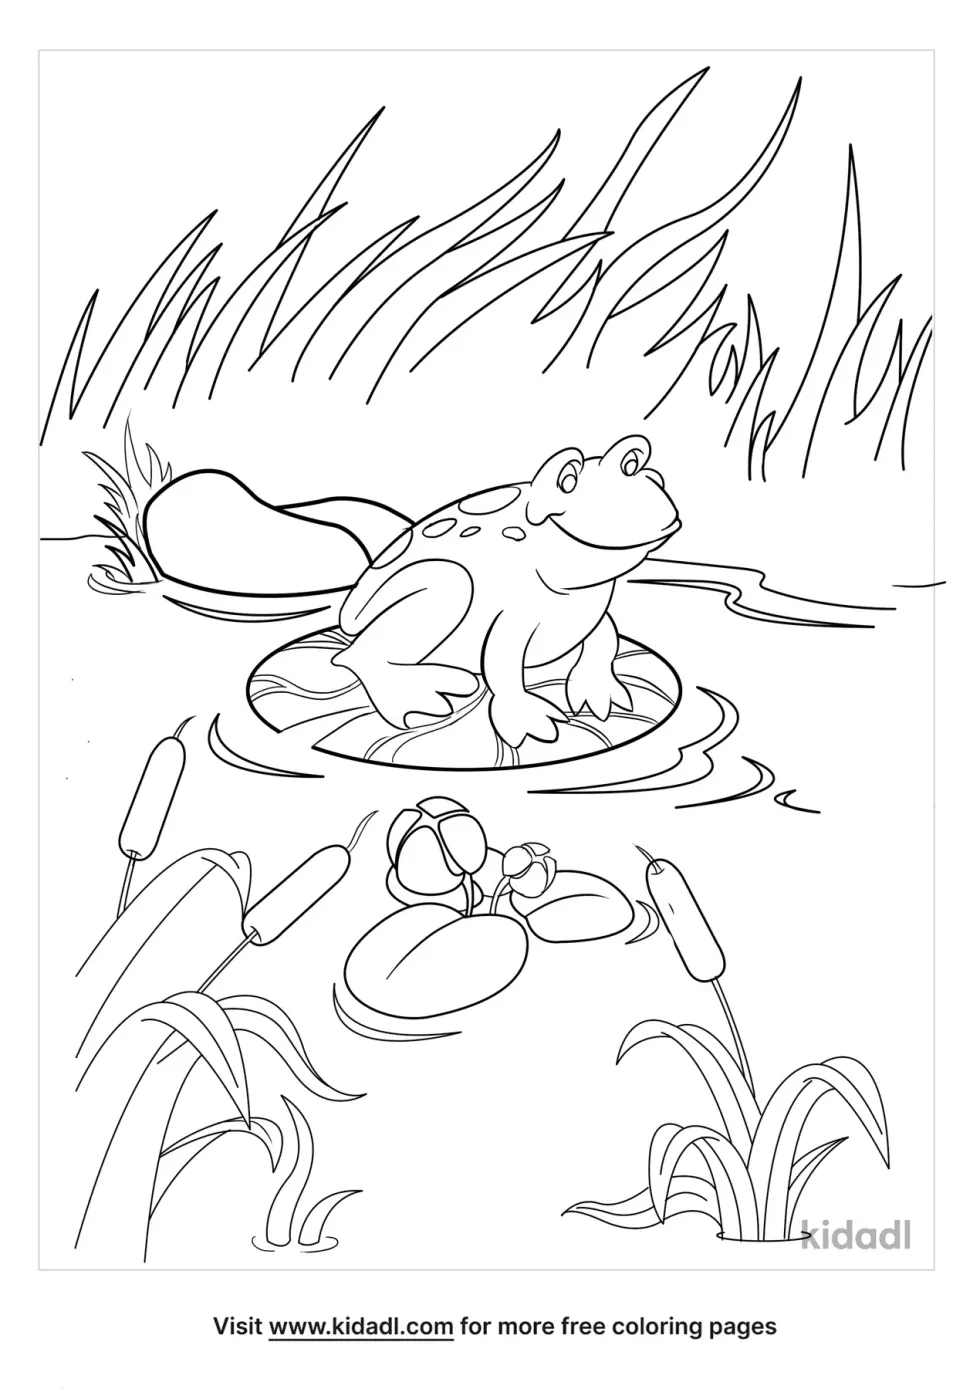 Frog In A Garden Coloring Page